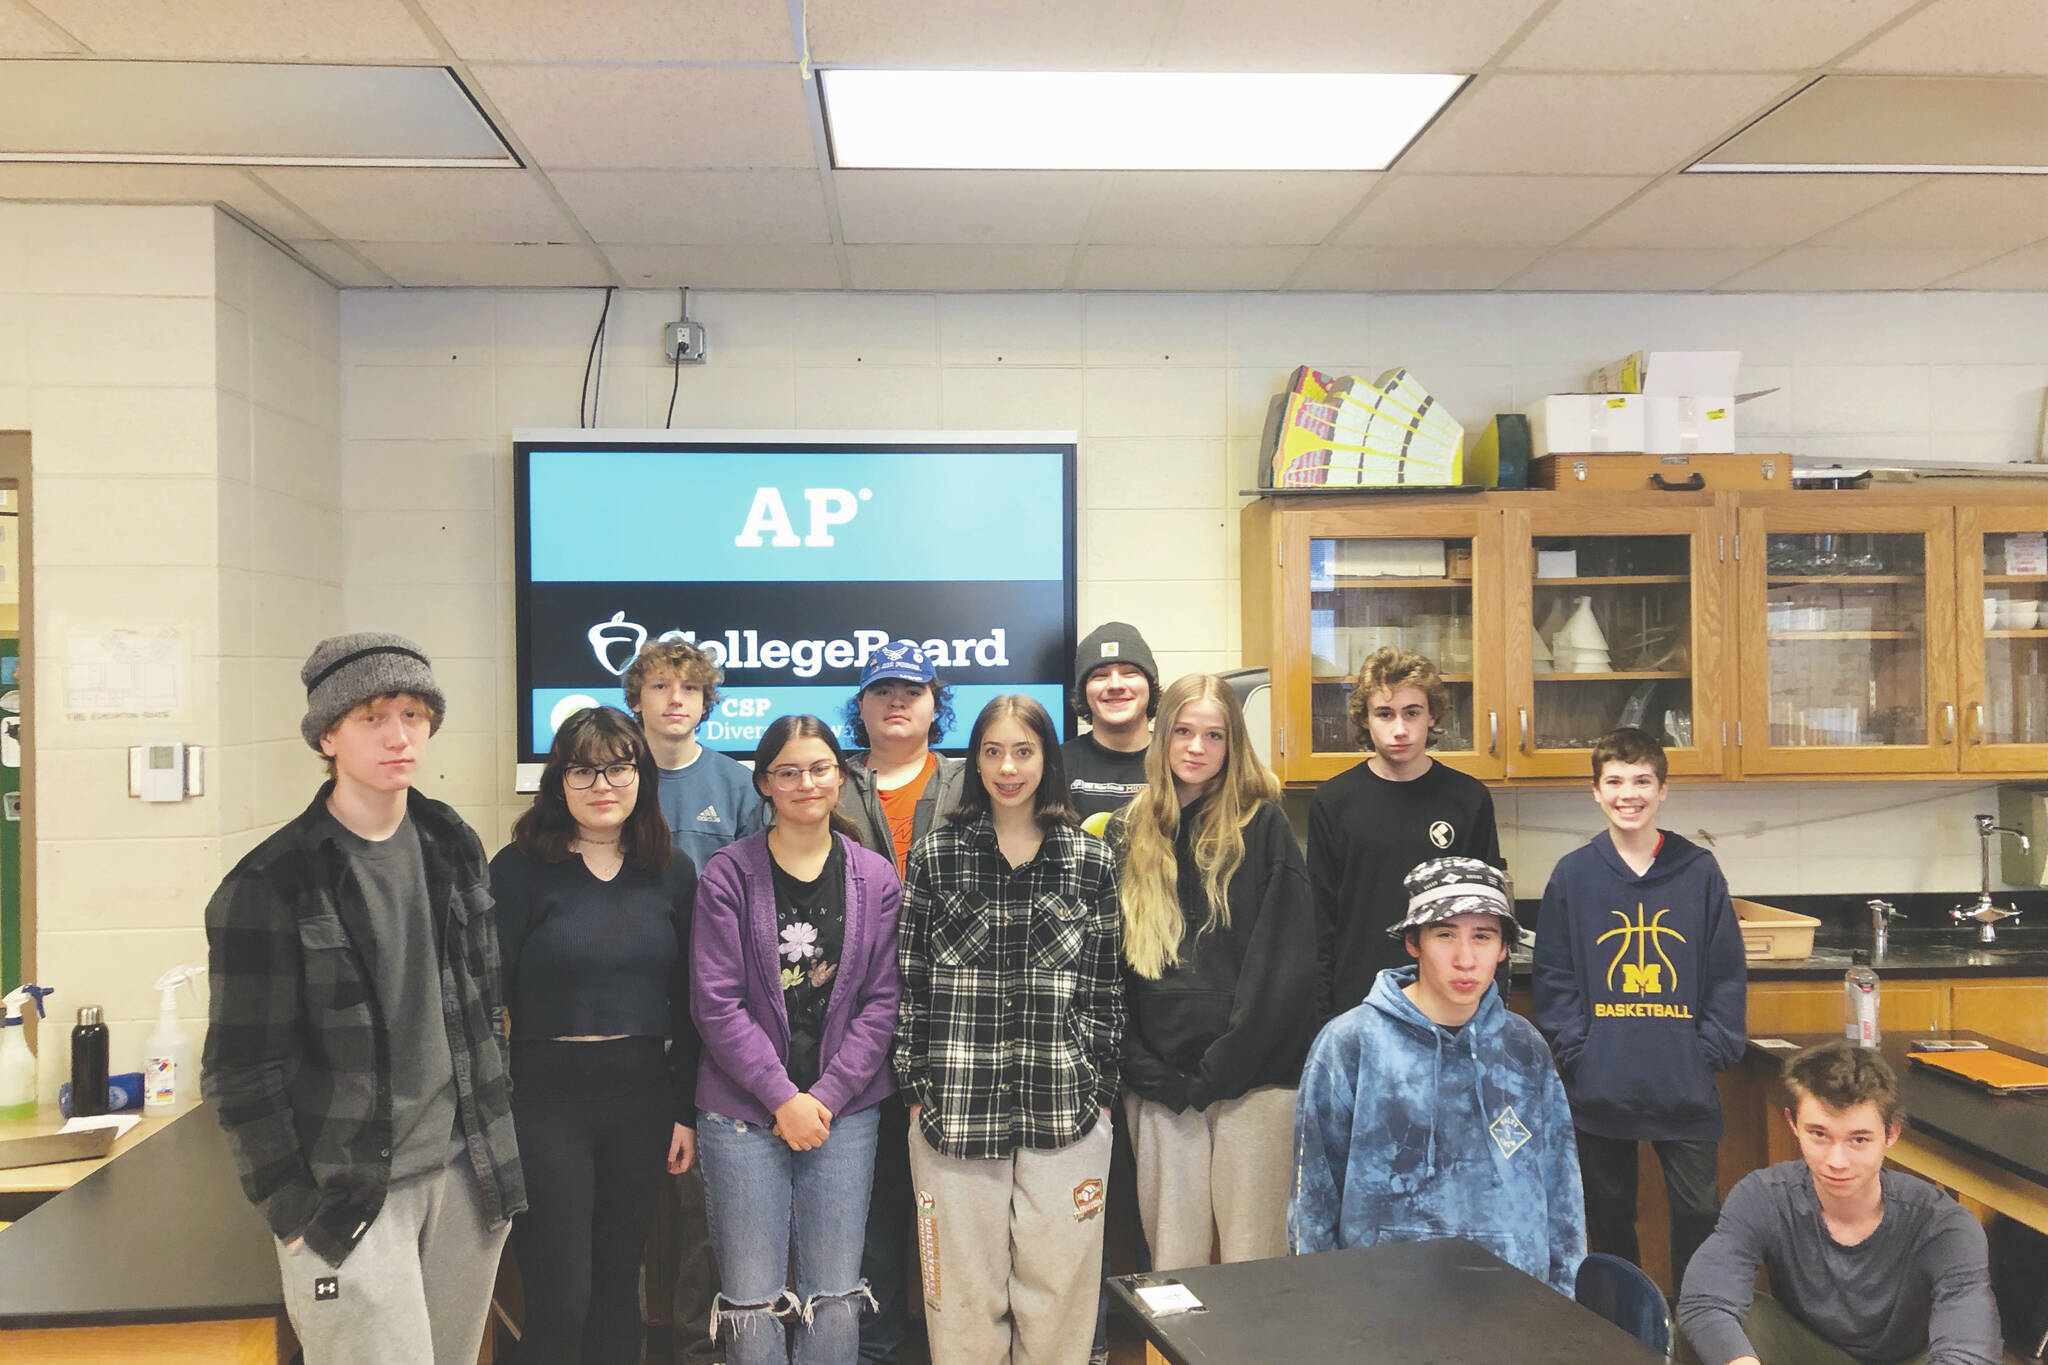 Photo provided by Jan Spurkland
Homer High School computer science students, from left, Andrew Skillingstad, Chloe Gall, Halen Nordstrom, Cecilia Fitzpatrick, Zane Sanchez, Regan Baker, Coleman Stephens, Elsa Otis, Leland Curtis, Samson Isaac, Brennan Steen, Caleb Brow (Note: several female students were absent on this day).